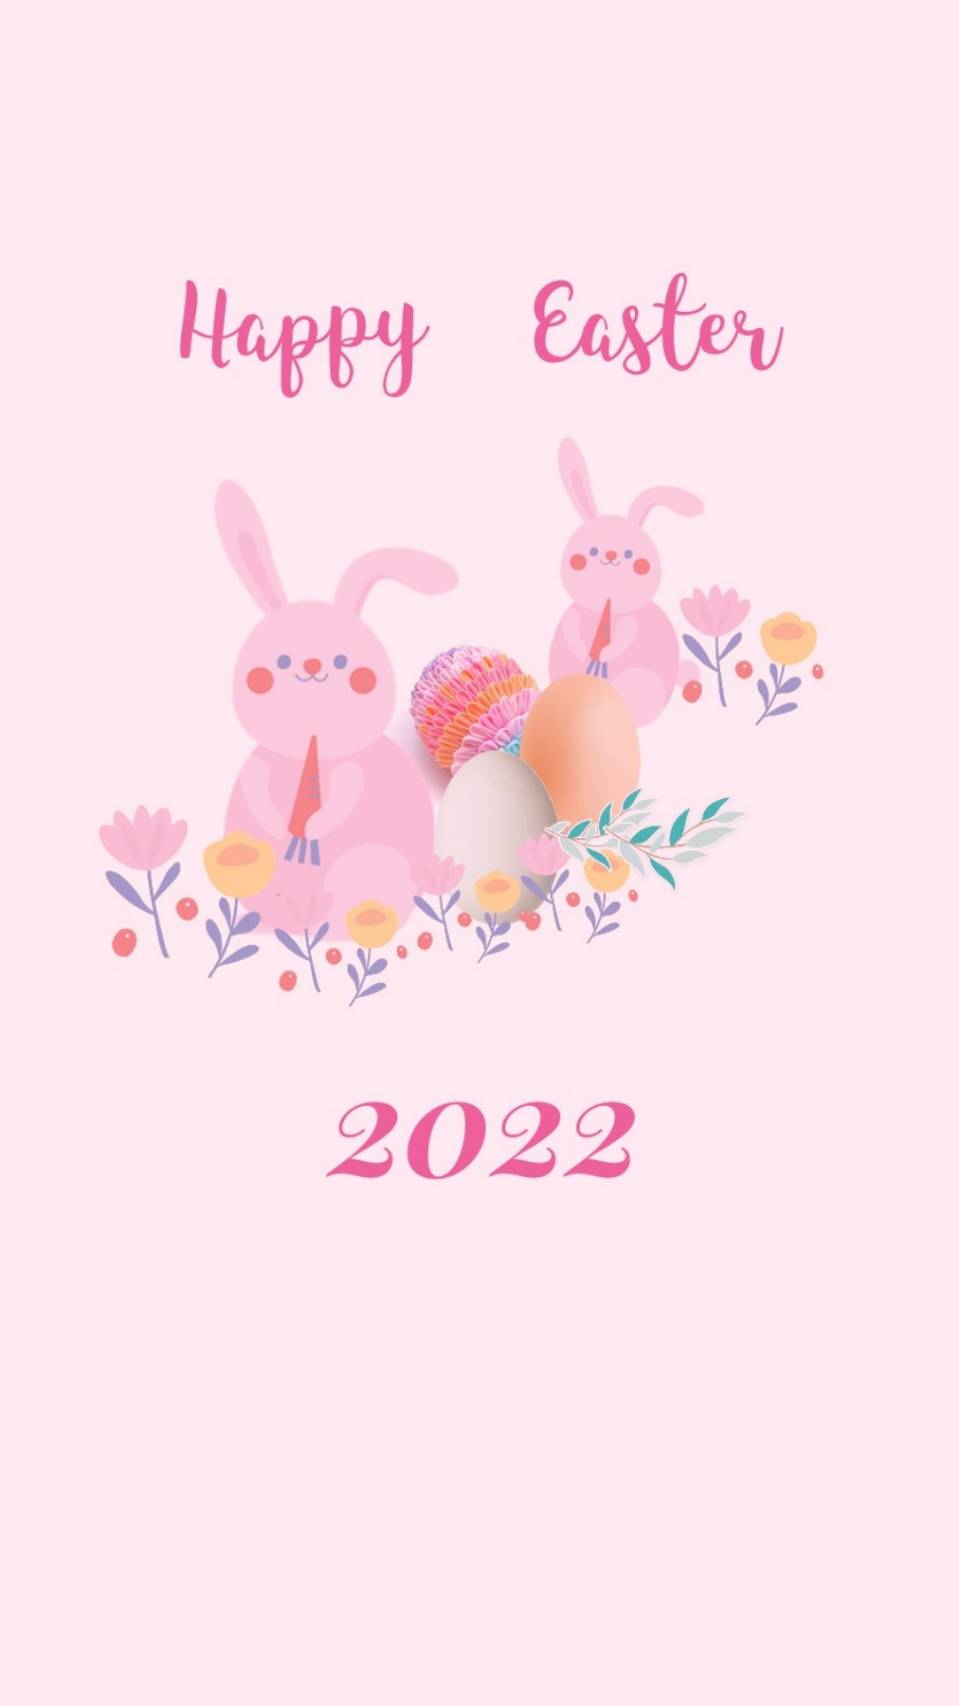 Happy Easter 2022 Wallpaper Aesthetic For Phone Or Computer Wallpaper